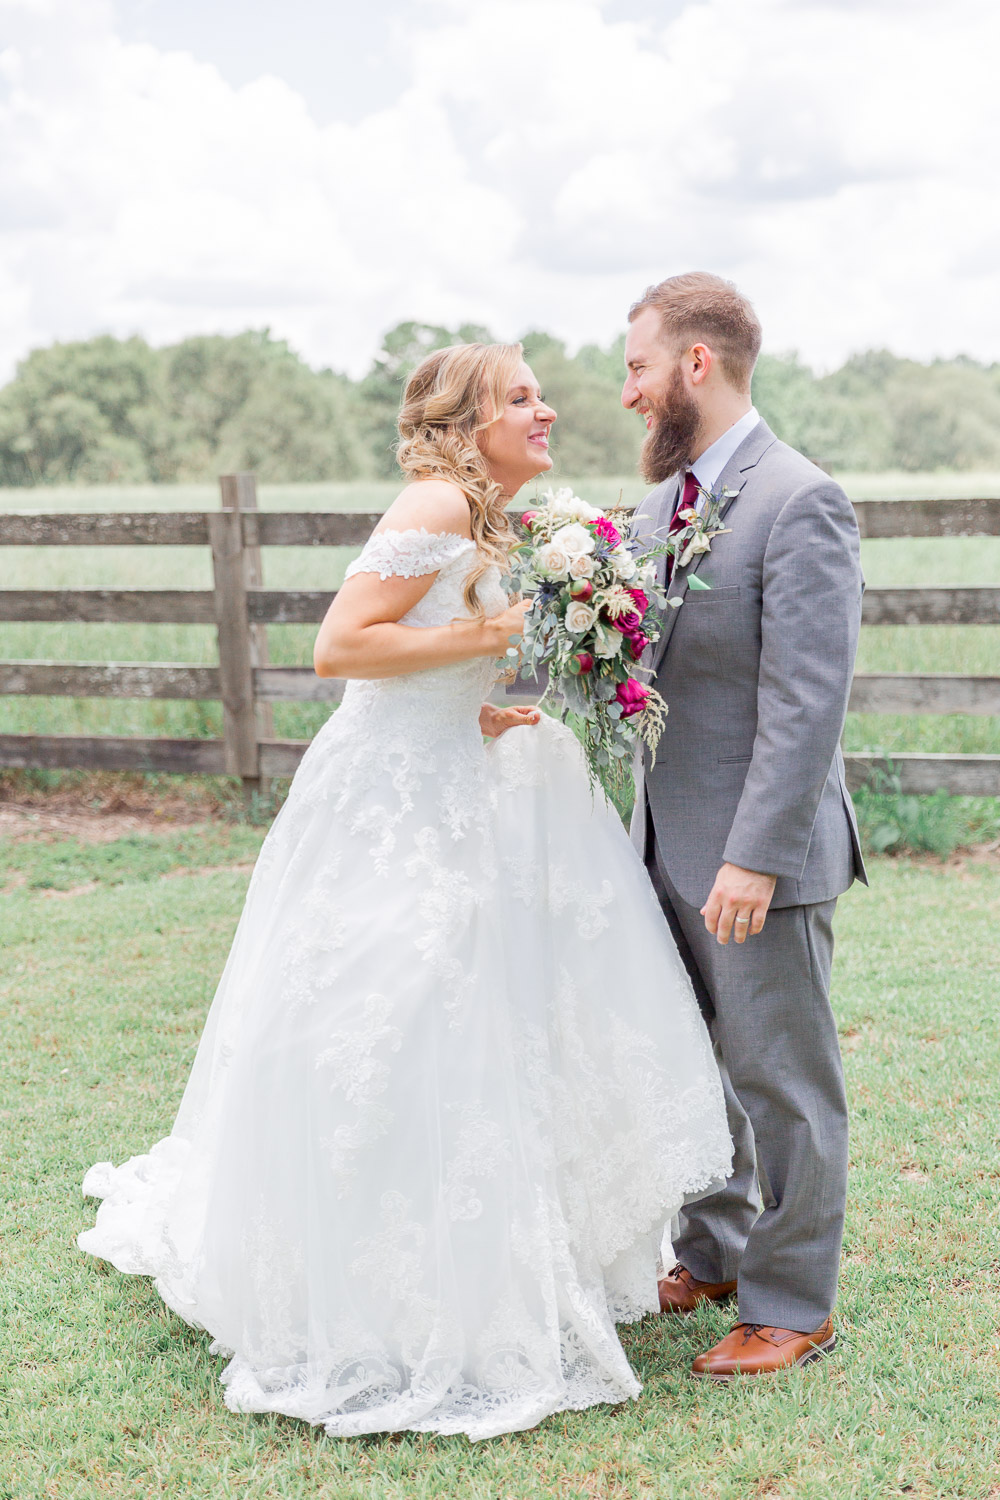 Mississippi Wedding Photographer | Bride and groom portrait | Just married